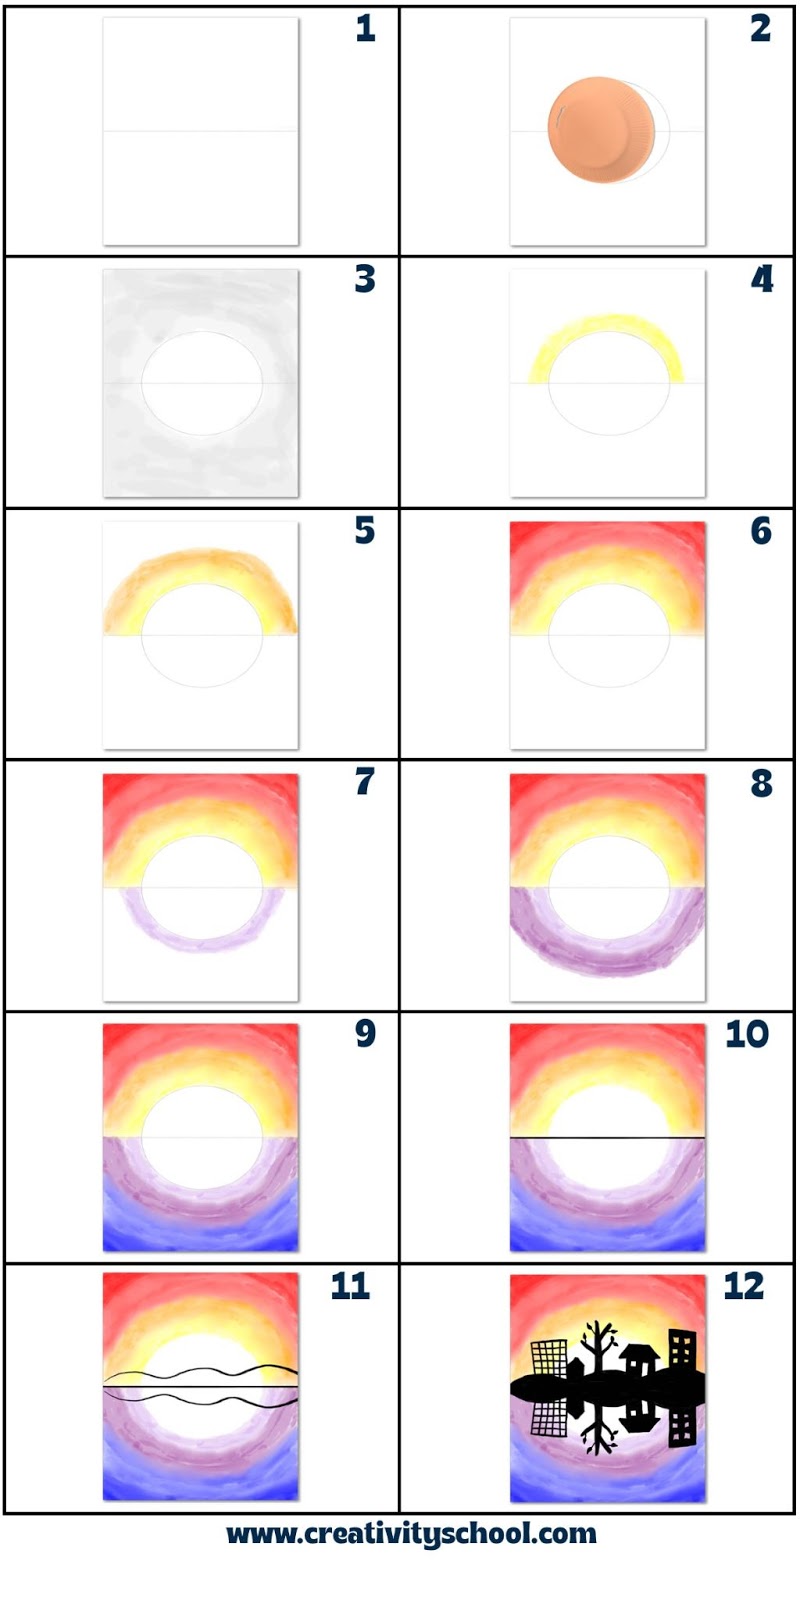 Overview of the step by step guide on how to paint a sunset.